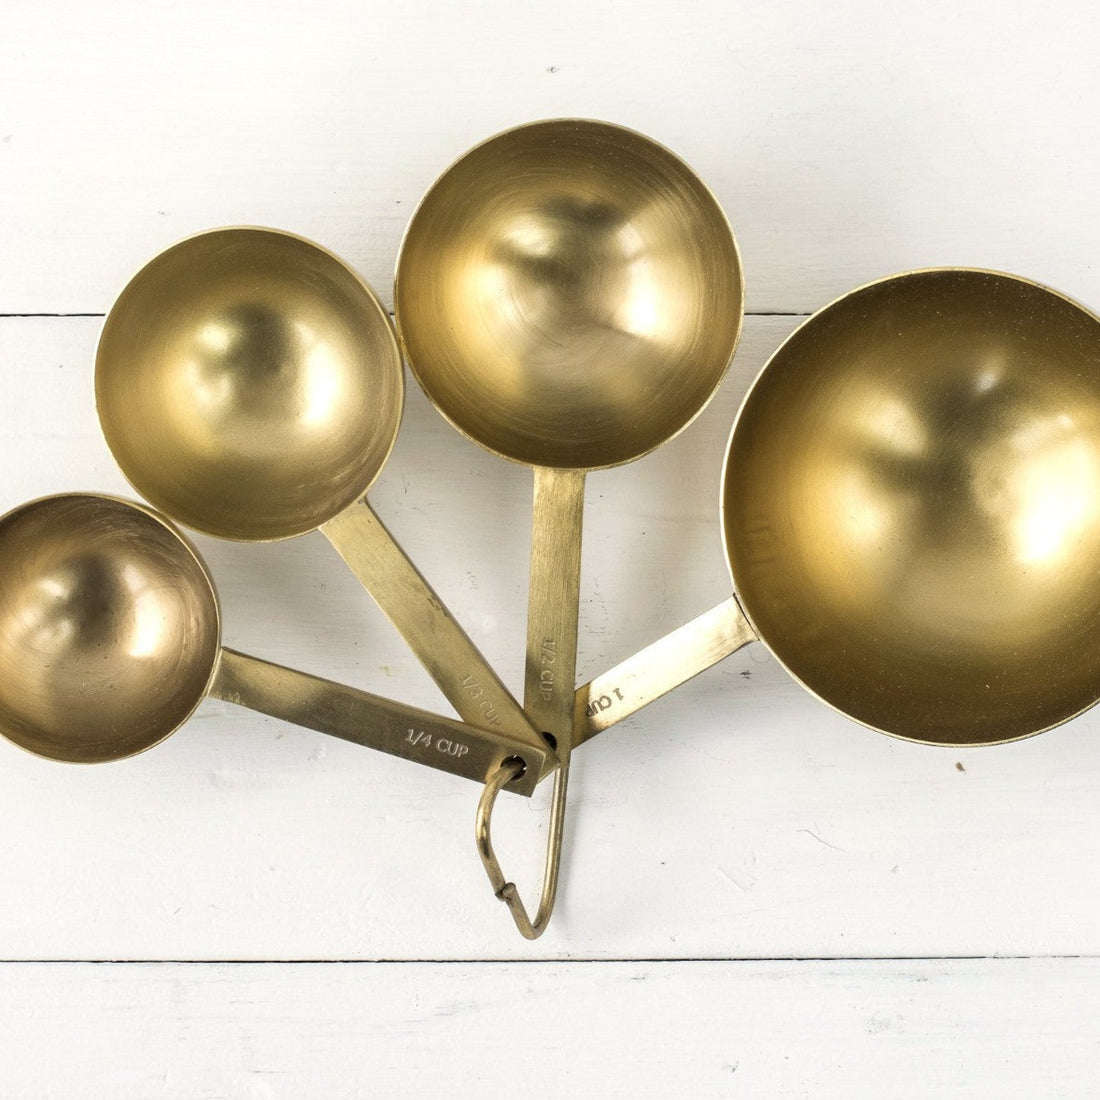 Set of Be Home brass measuring cups on a white wooden surface.